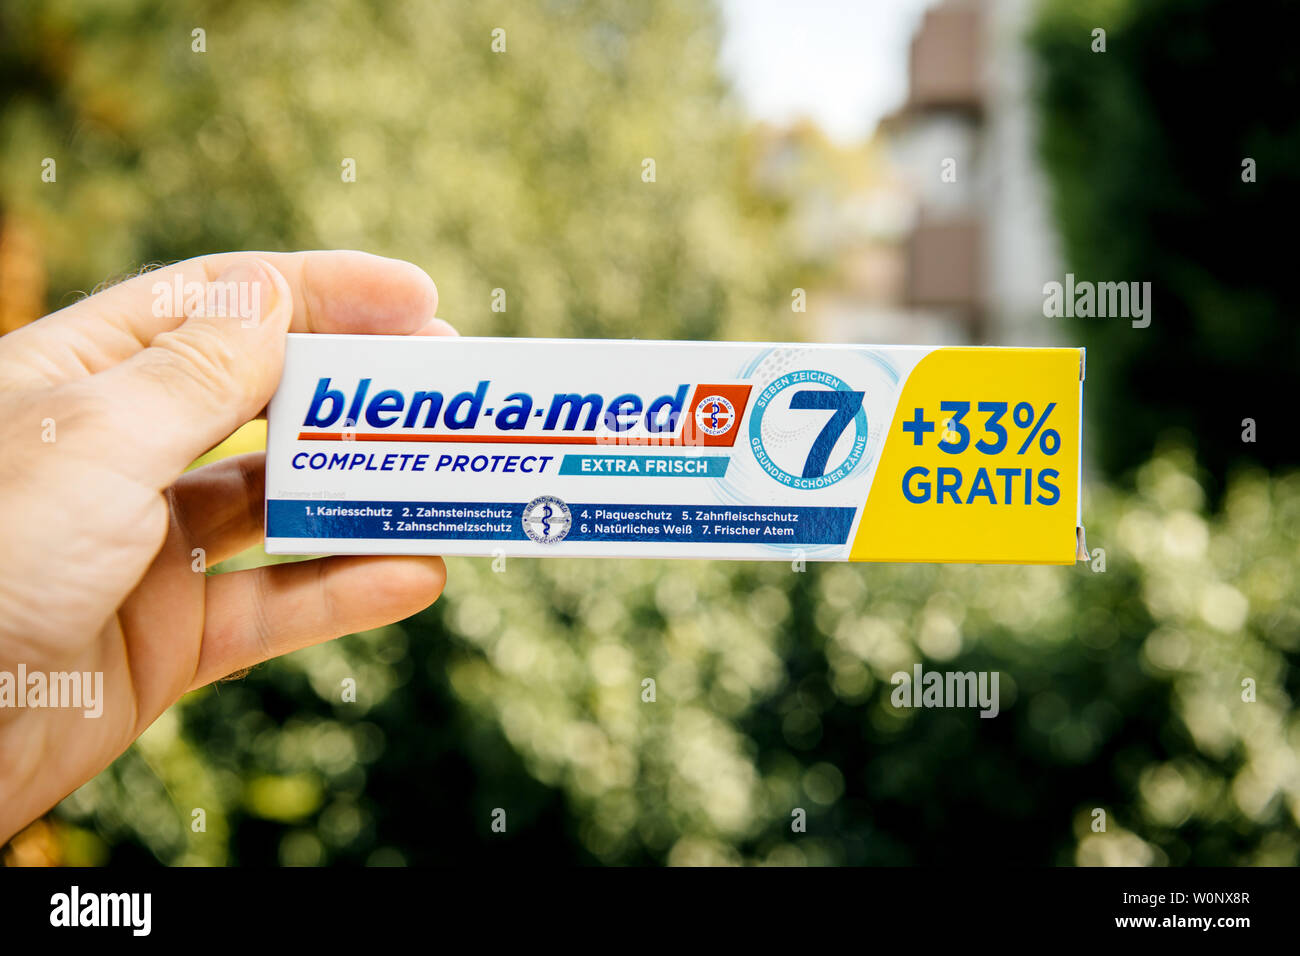 Blend A Med High Resolution Stock Photography and Images - Alamy